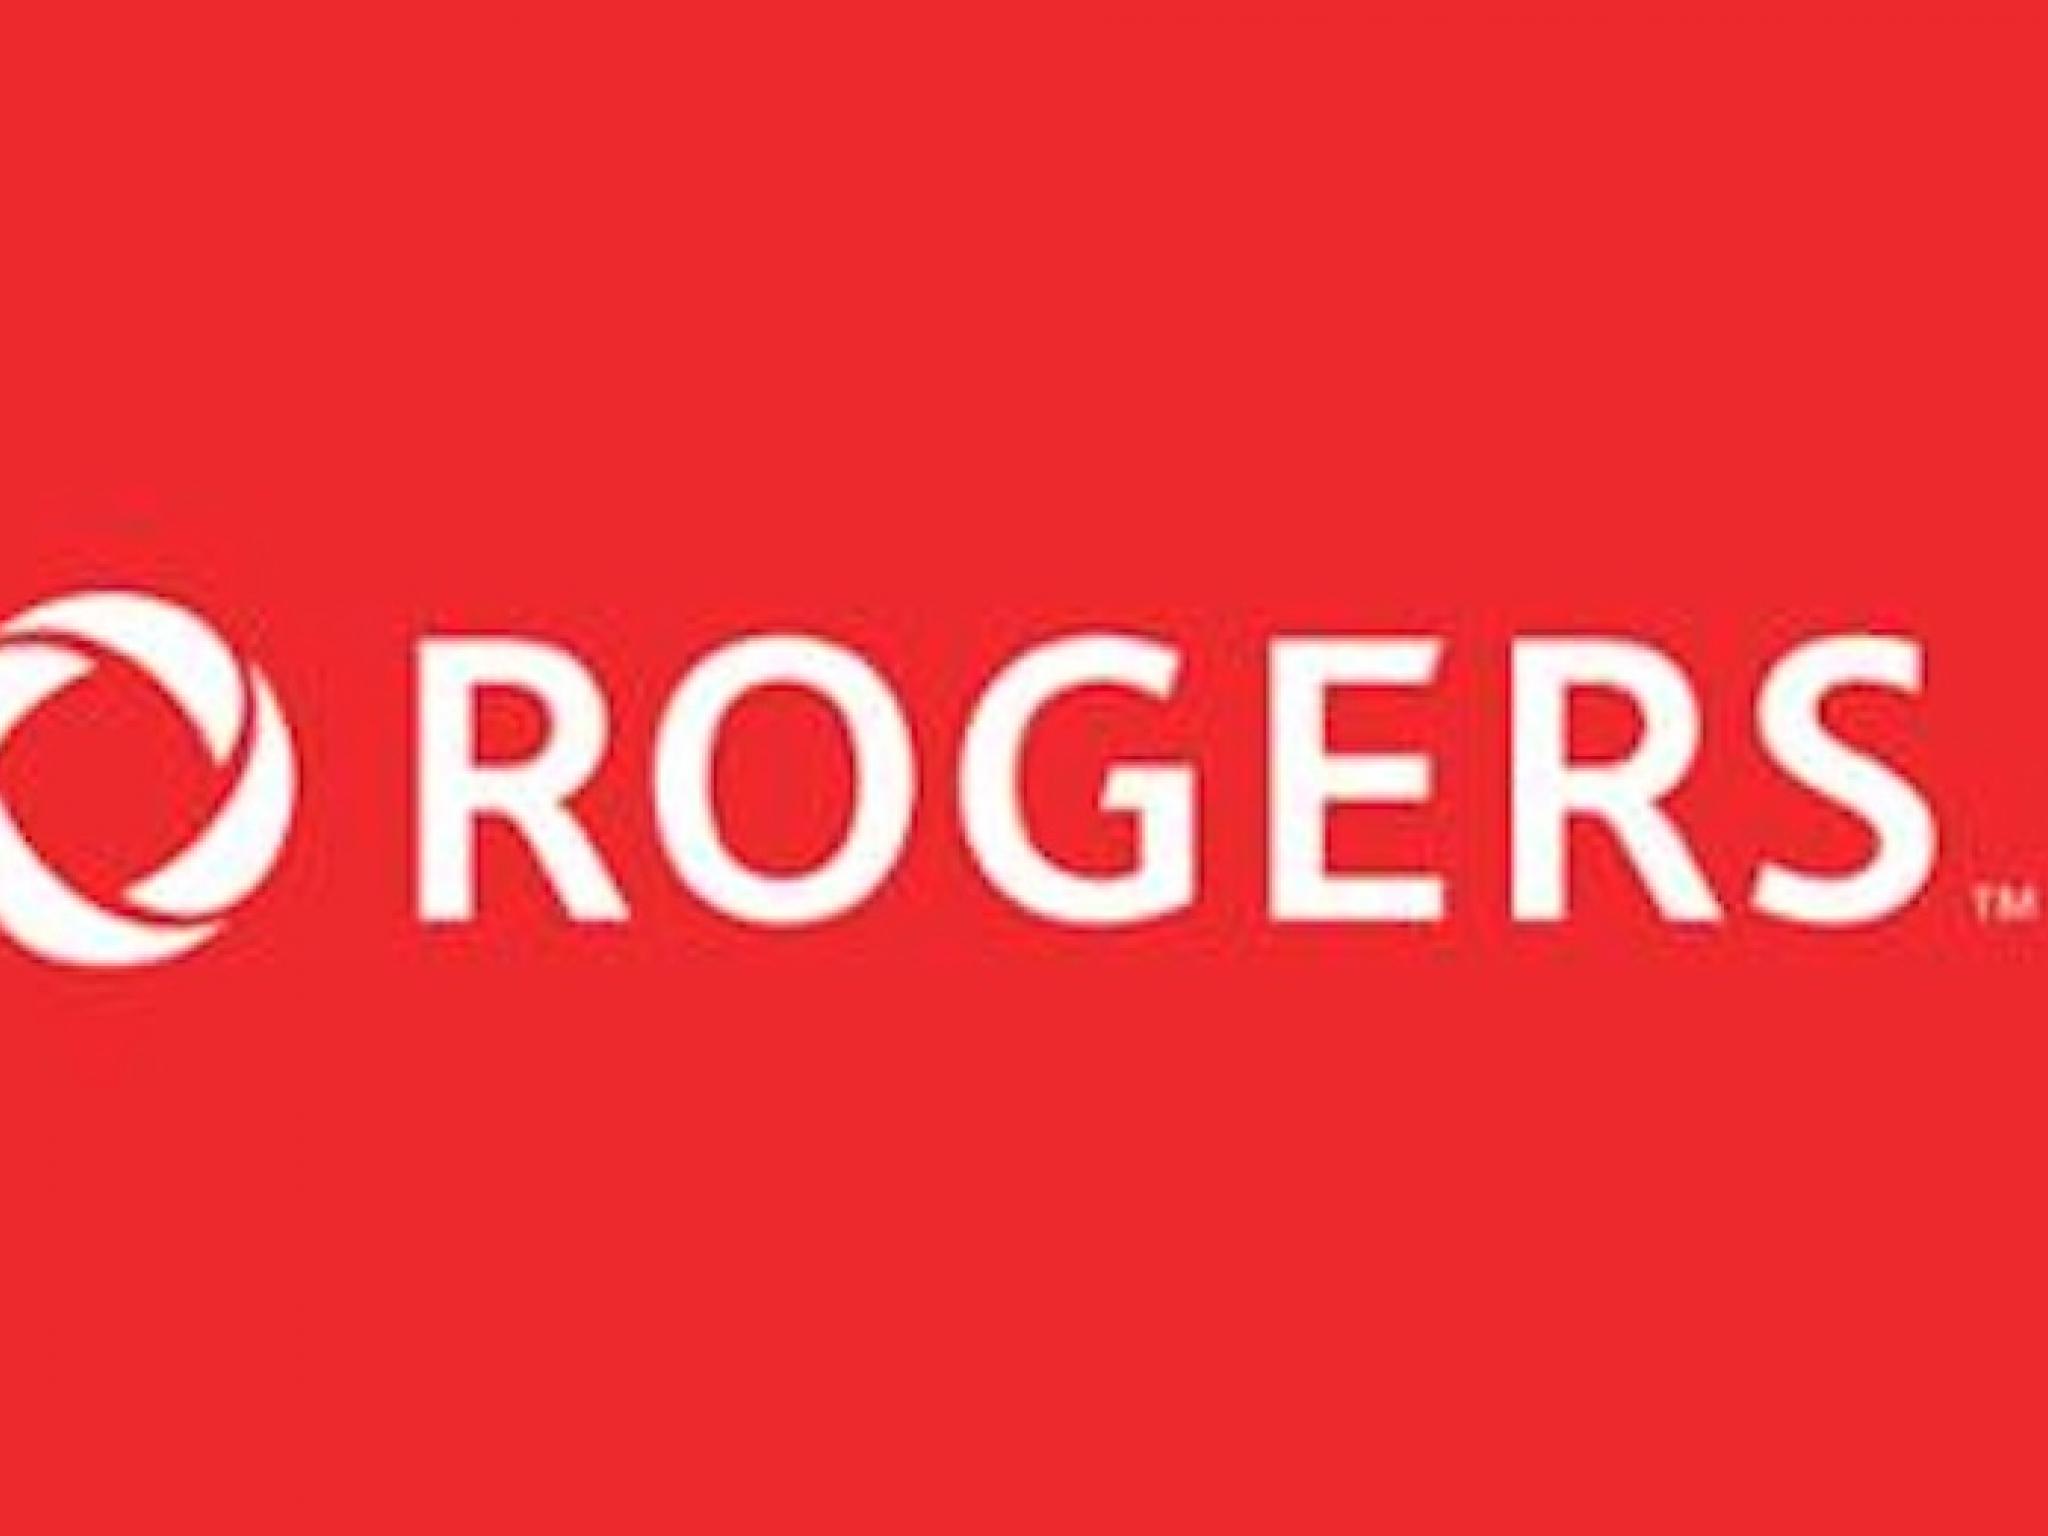  rogers-communication-boasts-6-revenue-spike-in-q4-backed-by-postpaid-subscriptions 